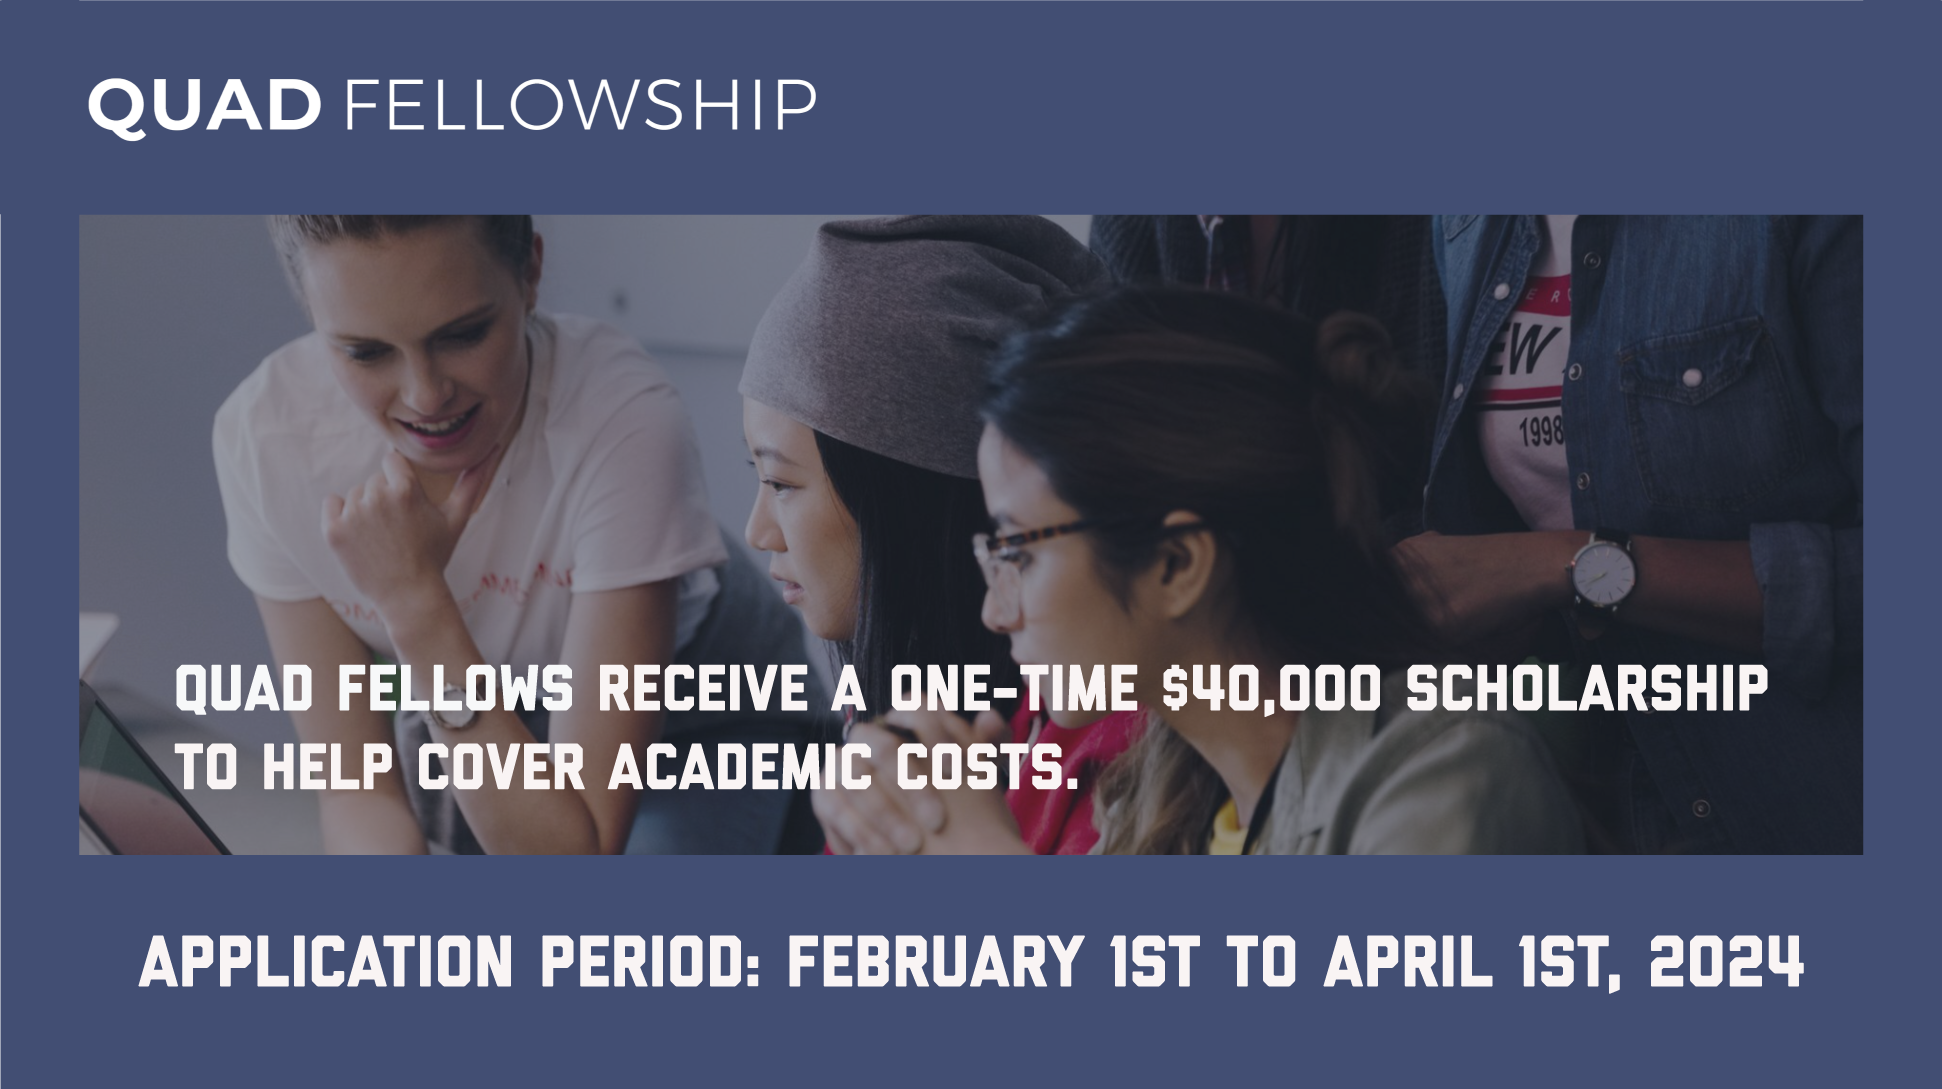 Apply for the Quad Fellowship